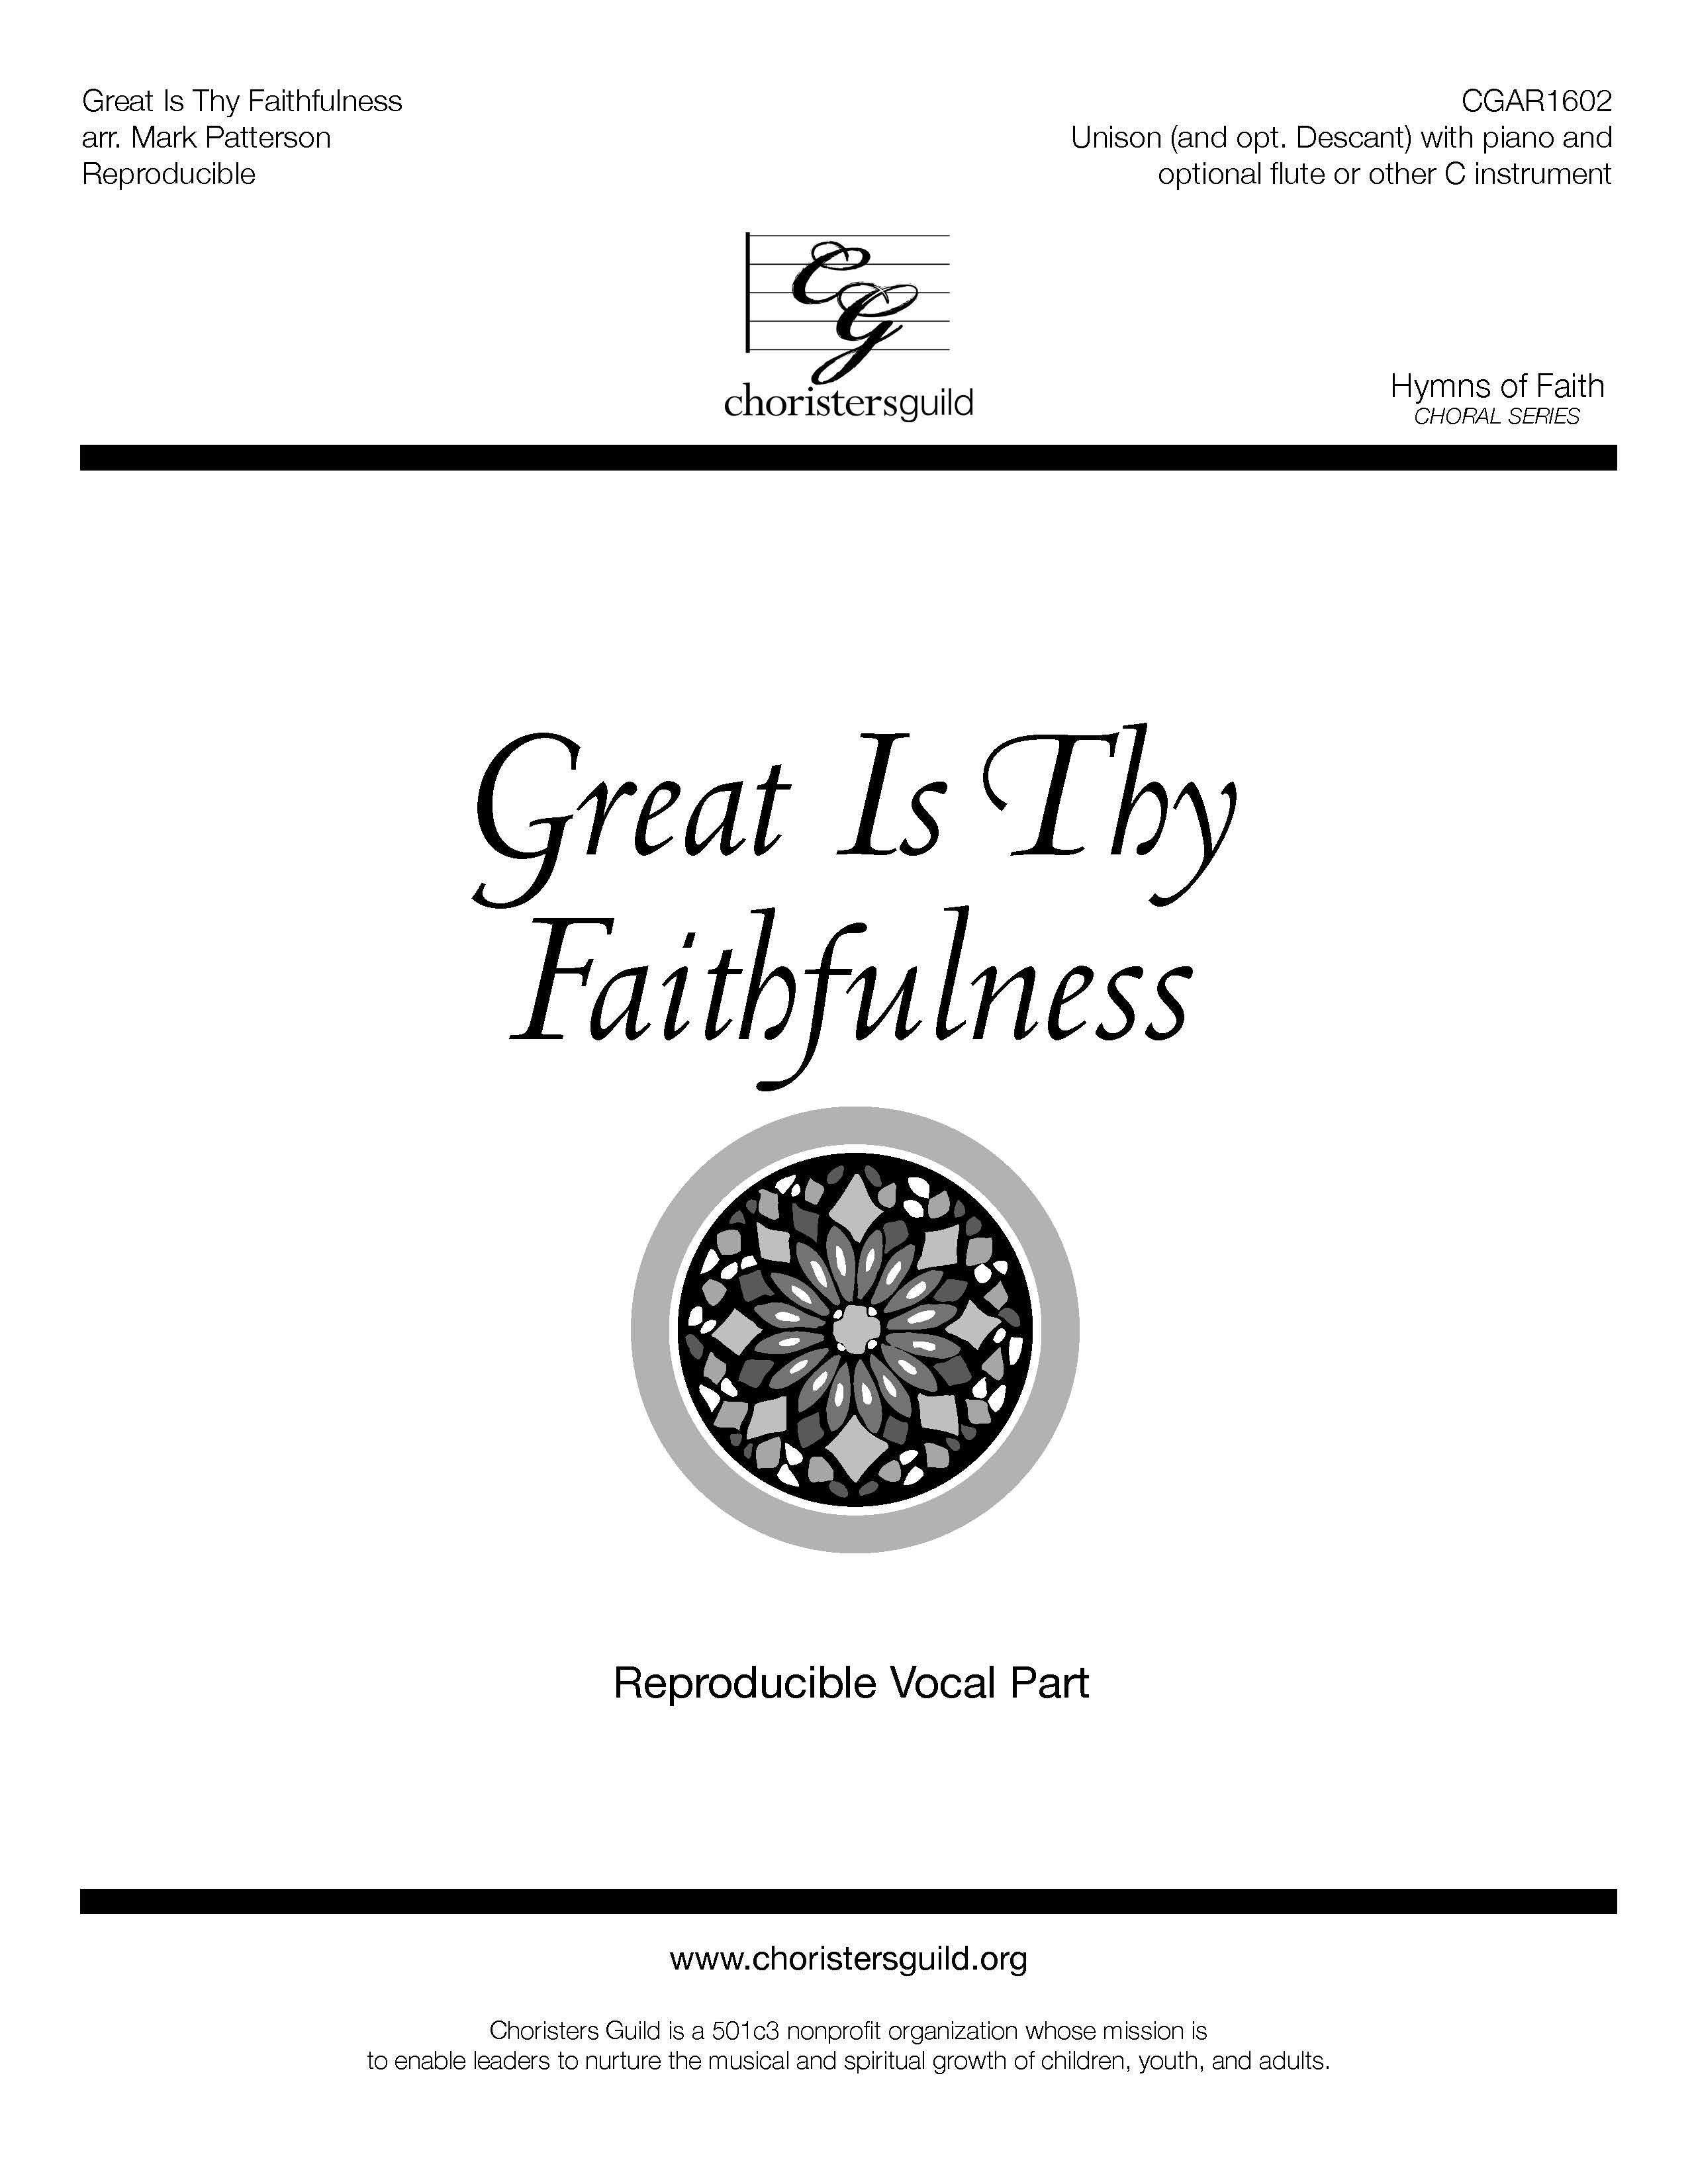 Reproducible Vocal Parts - Great Is Thy Faithfulness